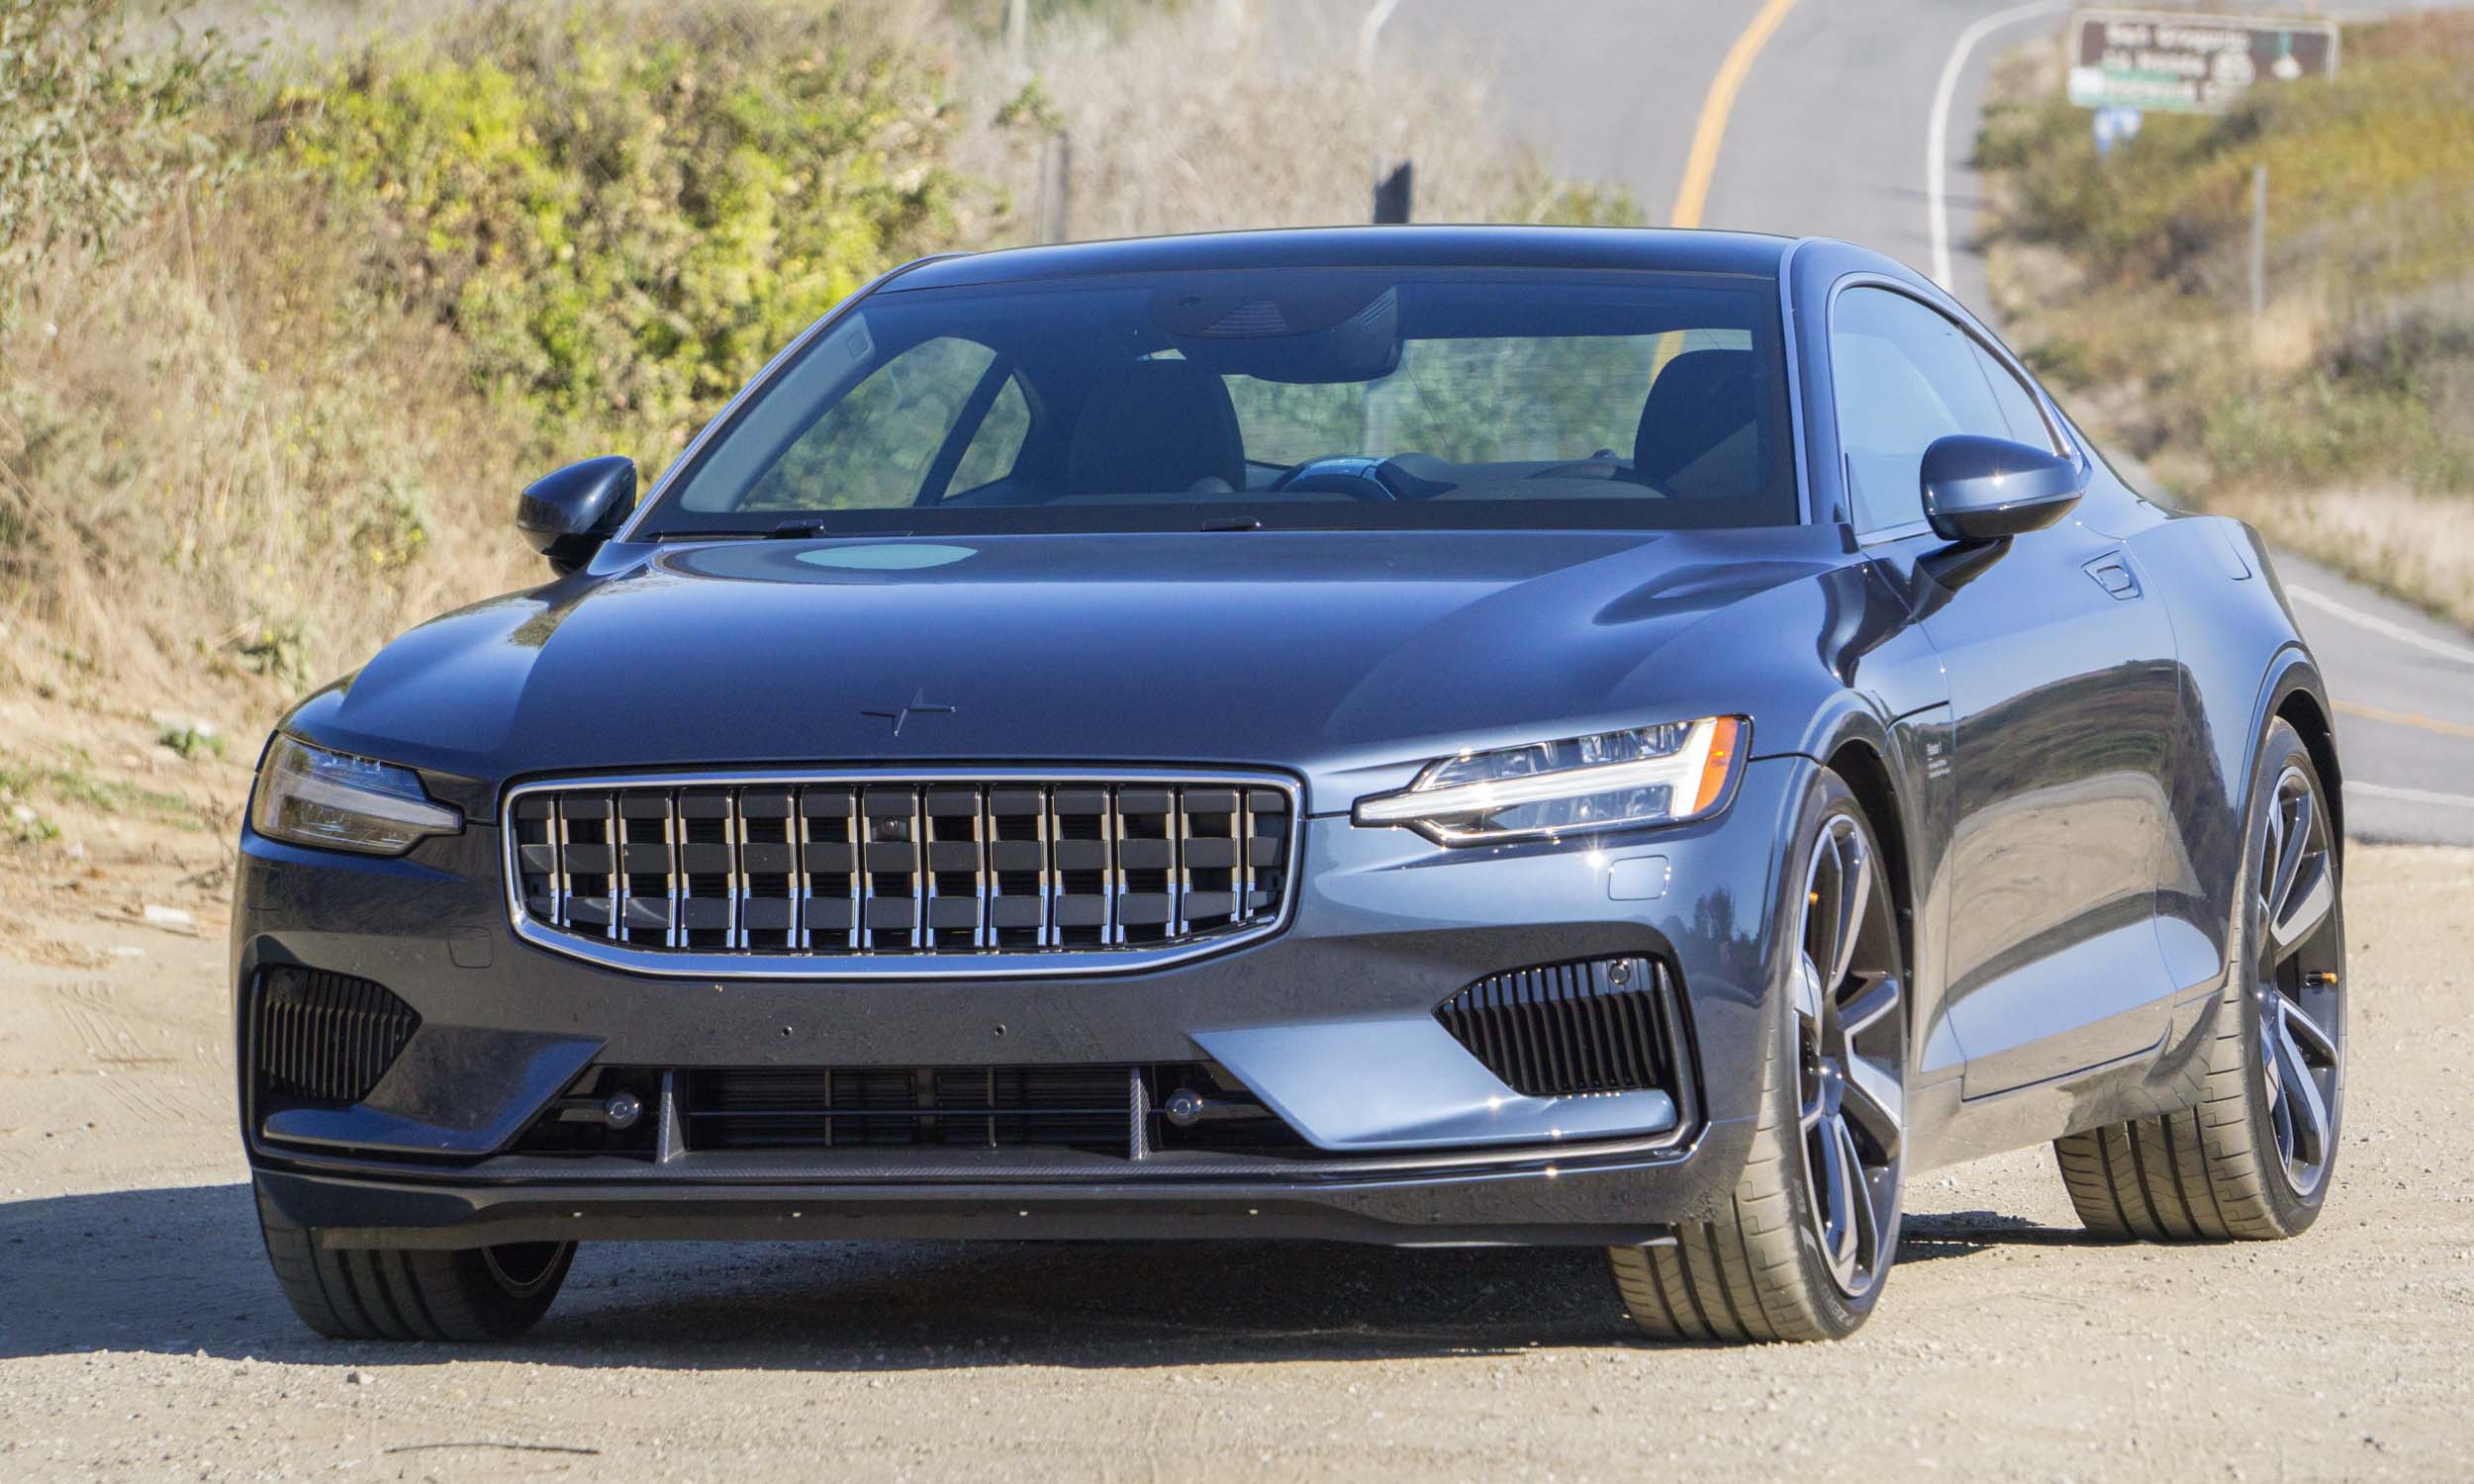 2020 Polestar 1: First Drive Review